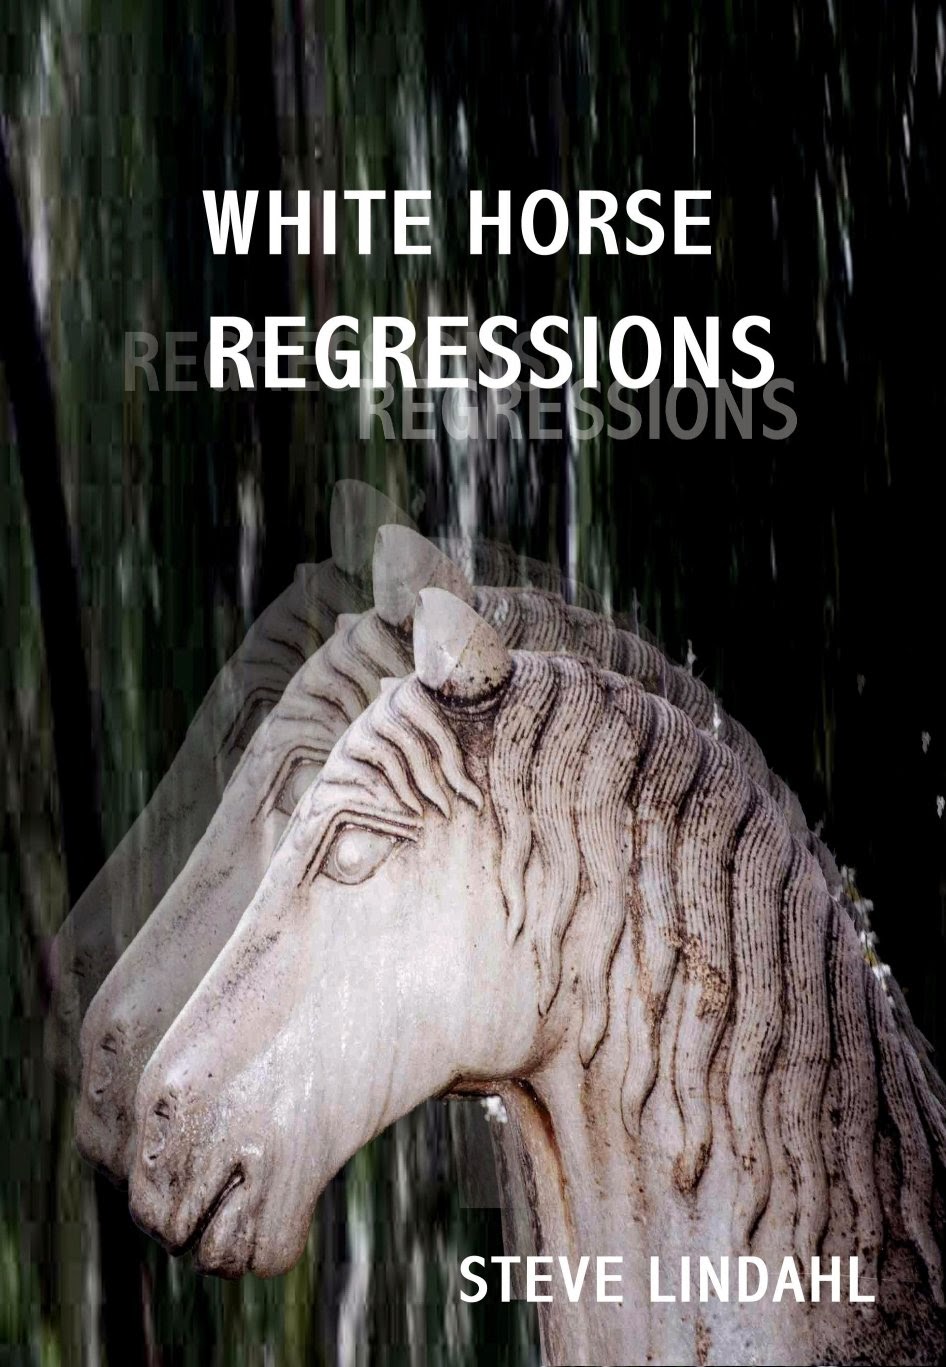 Buy White Horse Regressions